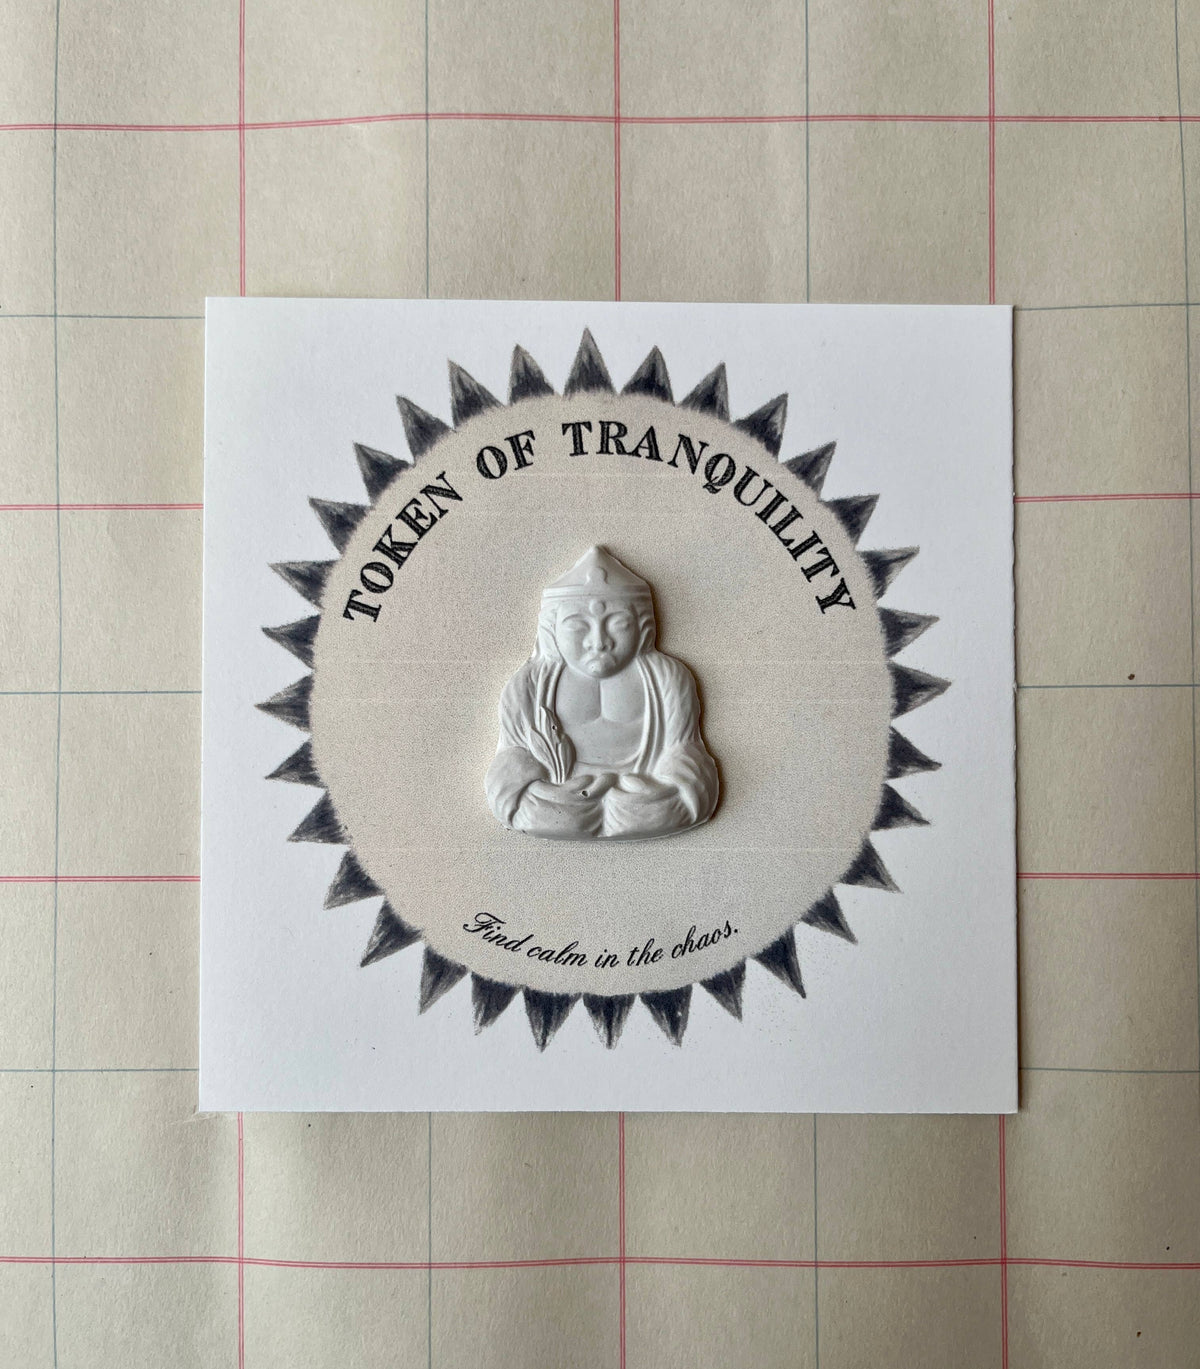 Affirmation Tokens: Clarity